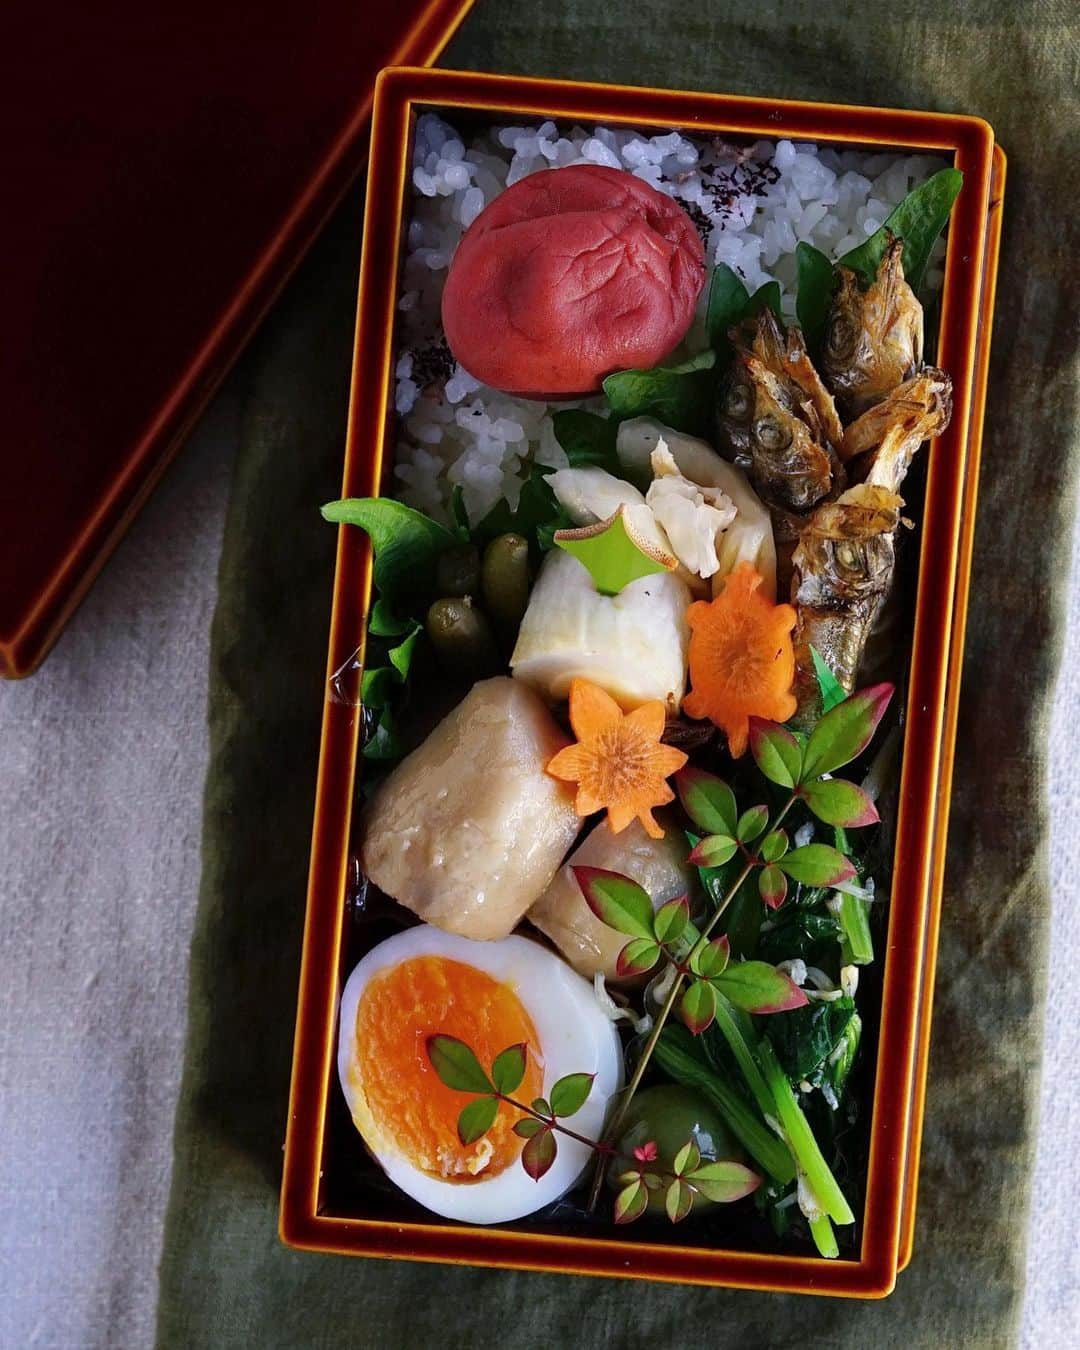 Ryoko Yunokiのインスタグラム：「+ + + Grilled capelin bento/焼きシシャモ弁当 . *rice and umeboshi *grilled capelin *chikuwa and cheese *pickled hakusai leaves *dashi-simmered taro root and green beans *blanched komatsuna leaves and whitebait salad *hard-boiled egg *green olive . ＊ご飯と梅干し ＊焼きシシャモ ＊竹輪チーズ ＊白菜の漬物 ＊里芋と隠元の出汁煮 ＊小松菜とシラスのお浸し ＊茹で卵 ＊オリーブ + + + #bento #お弁当 #丸の内弁当 #f52grams #春慶塗 #飛騨春慶」